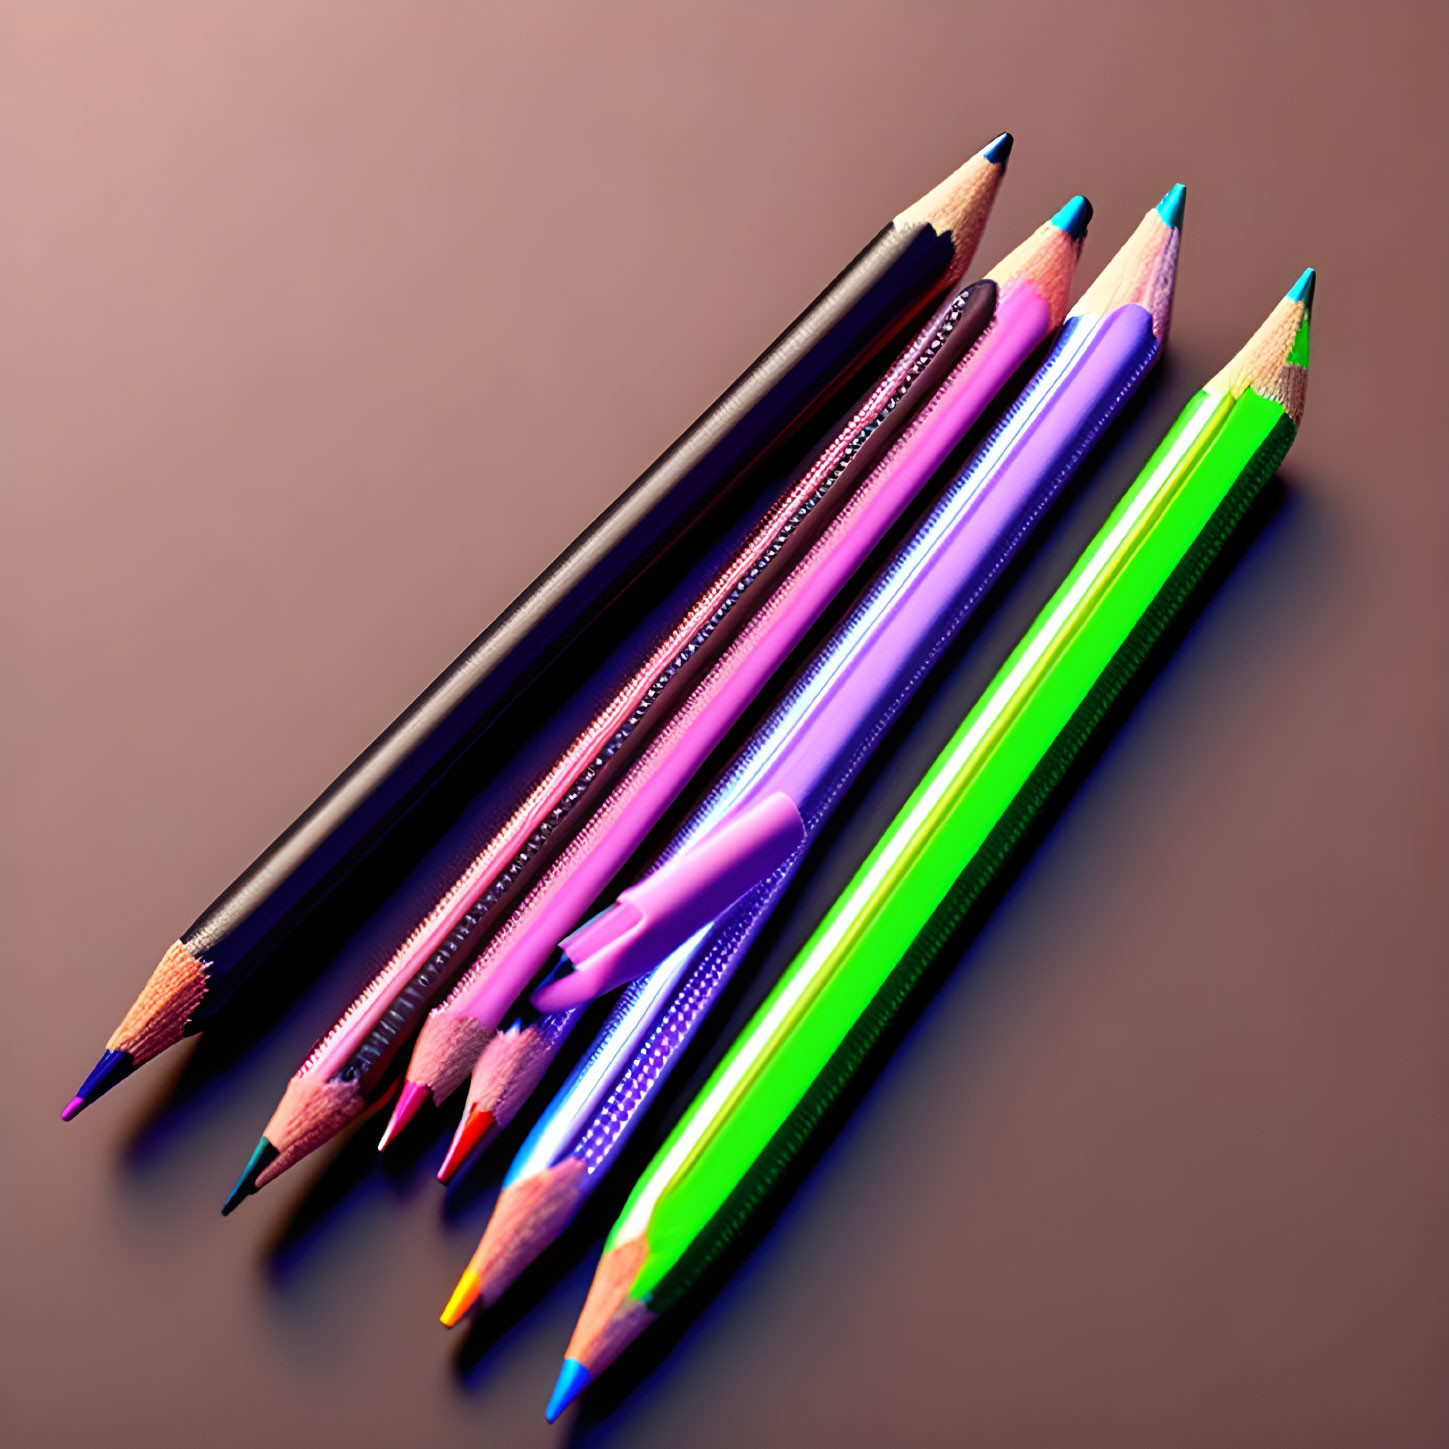 Vibrant neon effect on six colorful pencils against dark gradient background